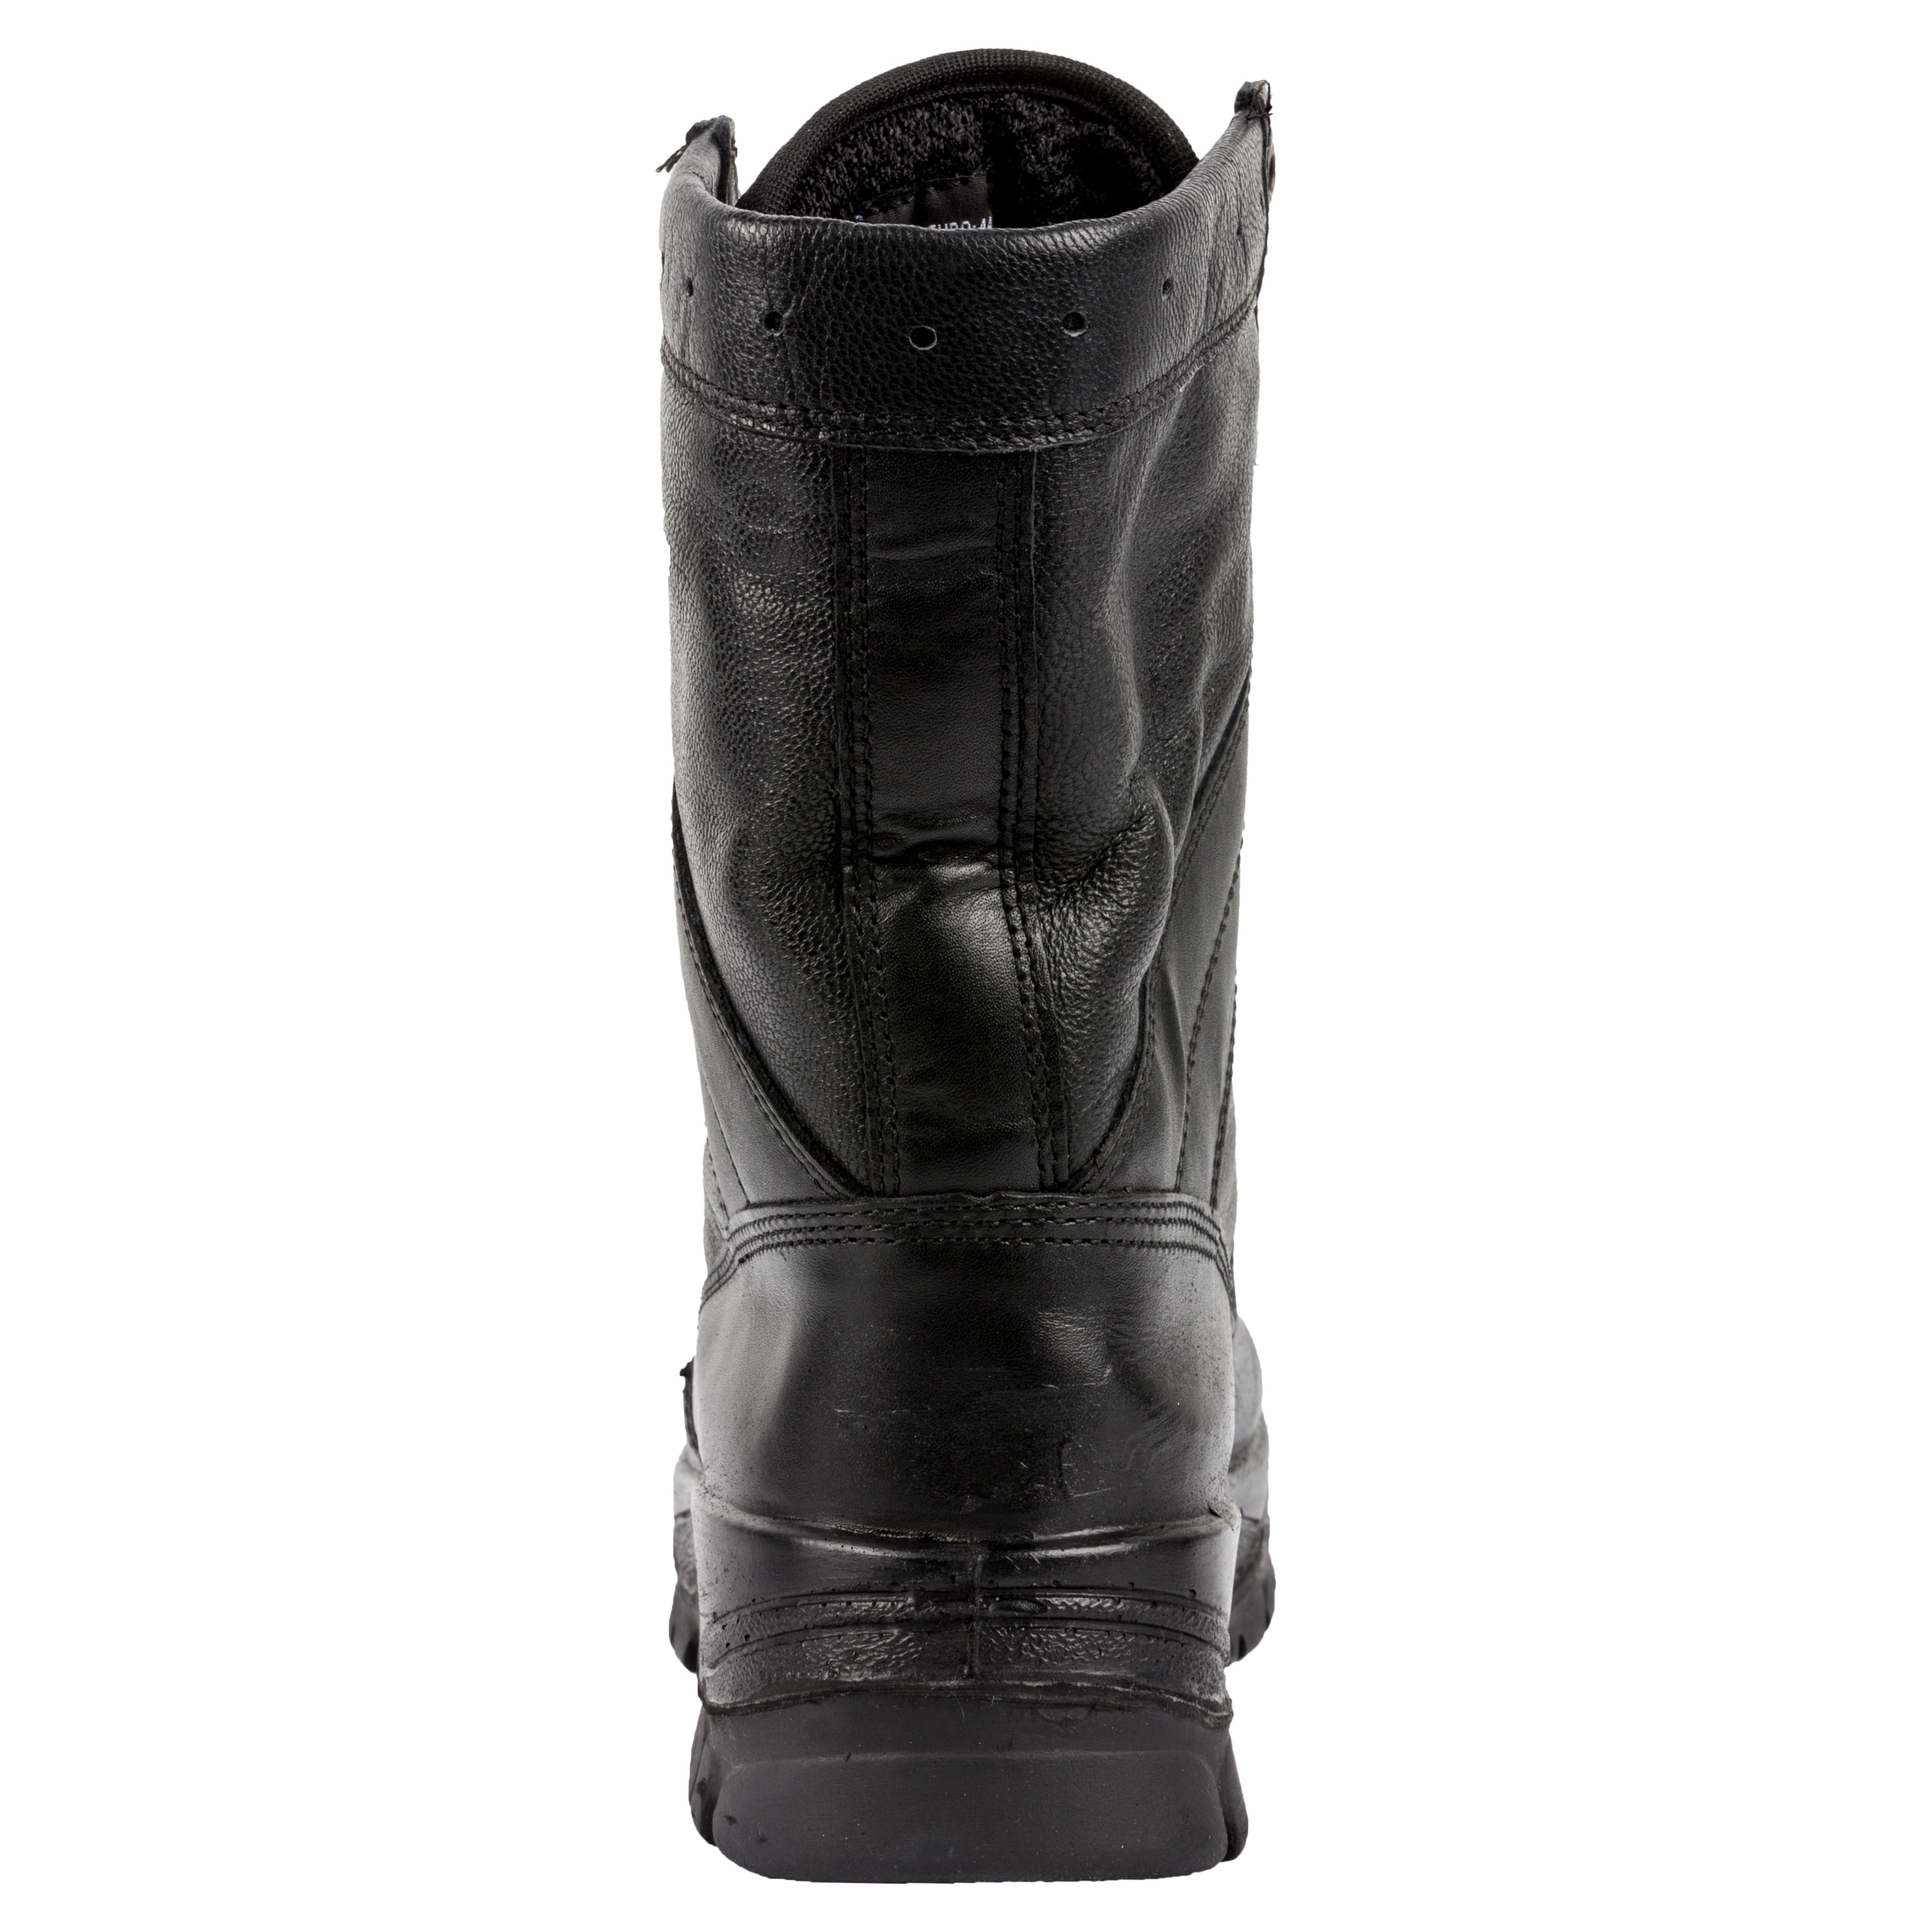 Highlander Boots Military Classic